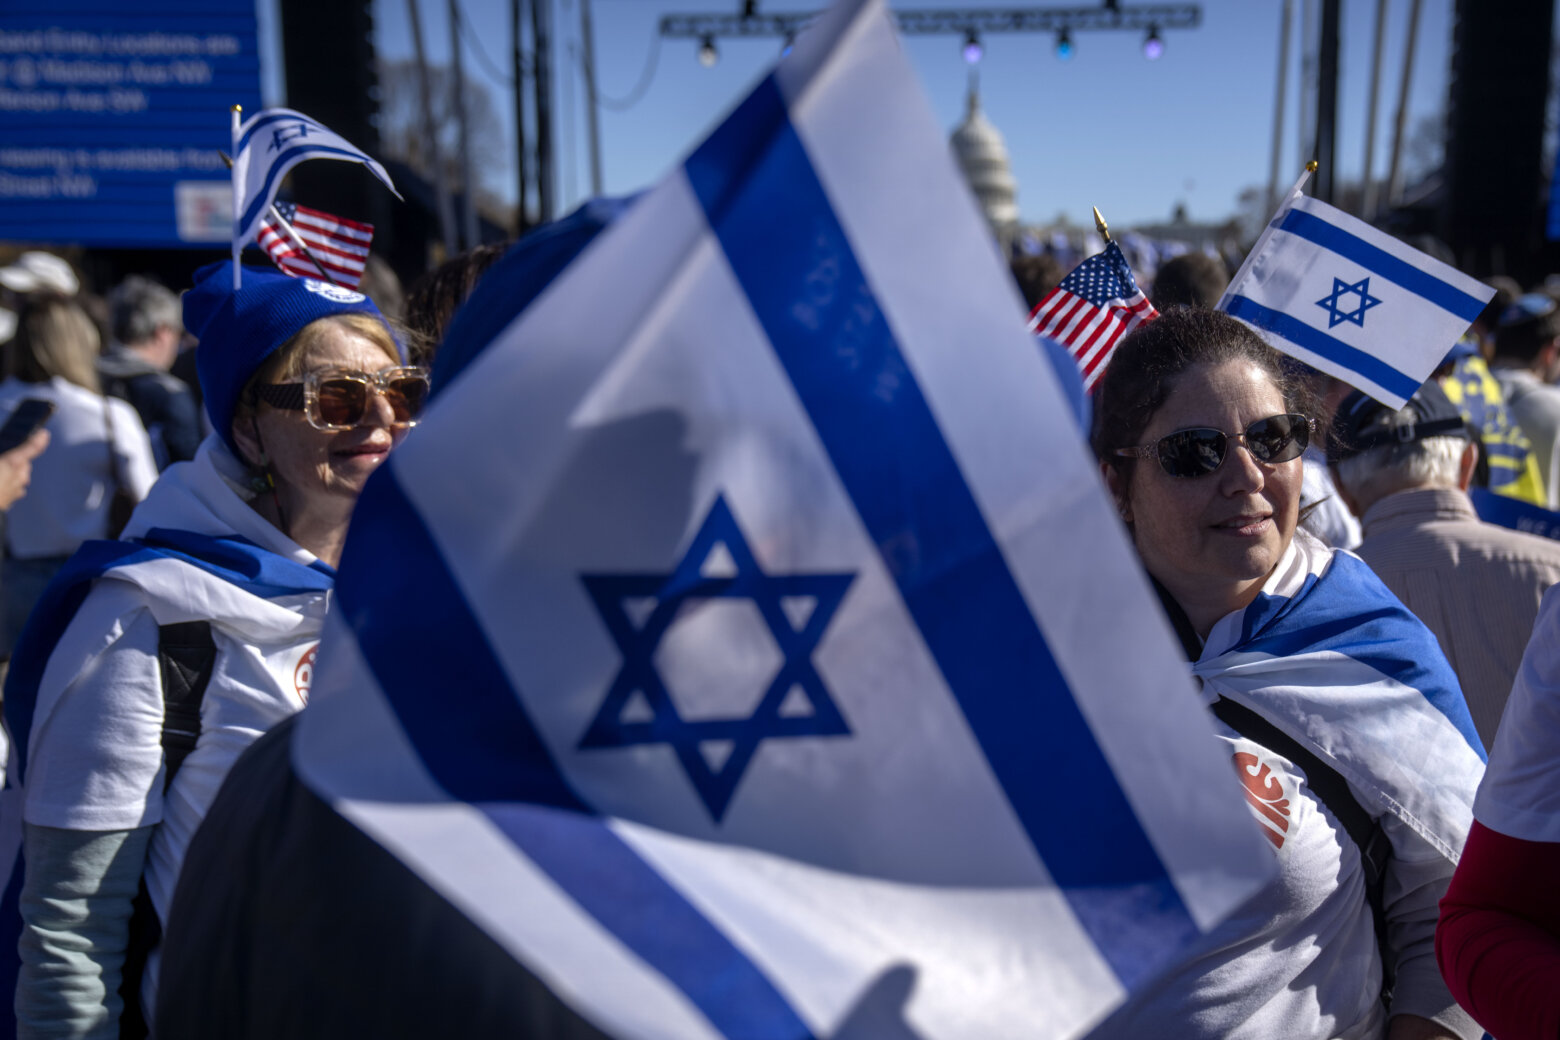 Participants wearing miniature Israeli flags stand on the National Mall at the March for Israel on Tuesday, Nov. 14, 2023, in Washington. (AP Photo/Mark Schiefelbein)